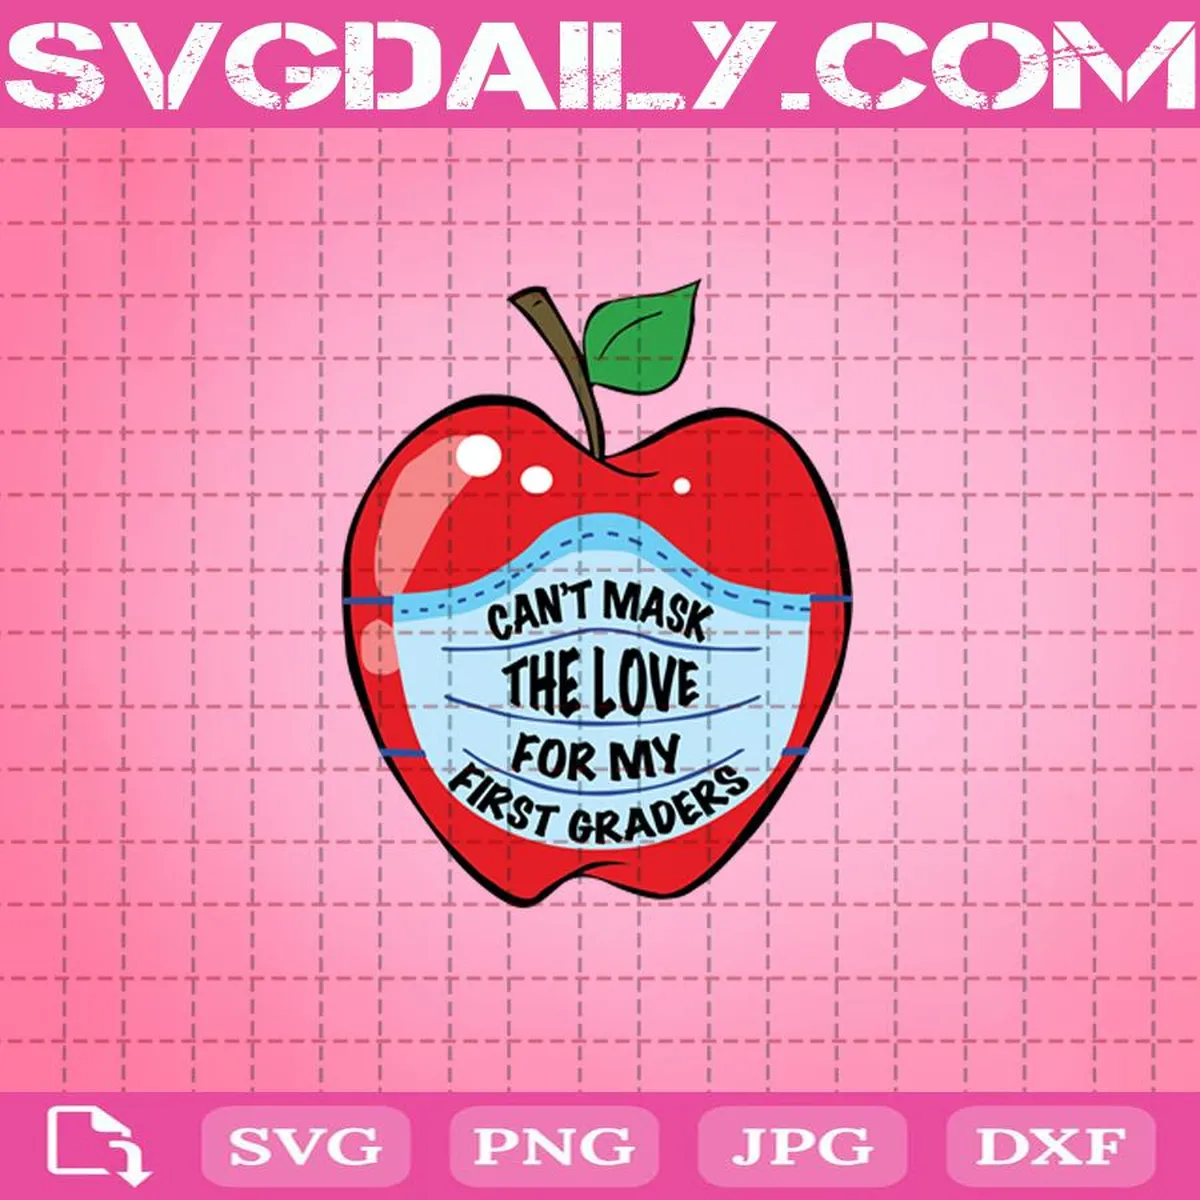 Can’t Mask The Love For My First Graders Svg, First Graders Svg, Teach Svg, Apple Svg, Back To School Svg, Quarantine Svg, Face Mask Svg